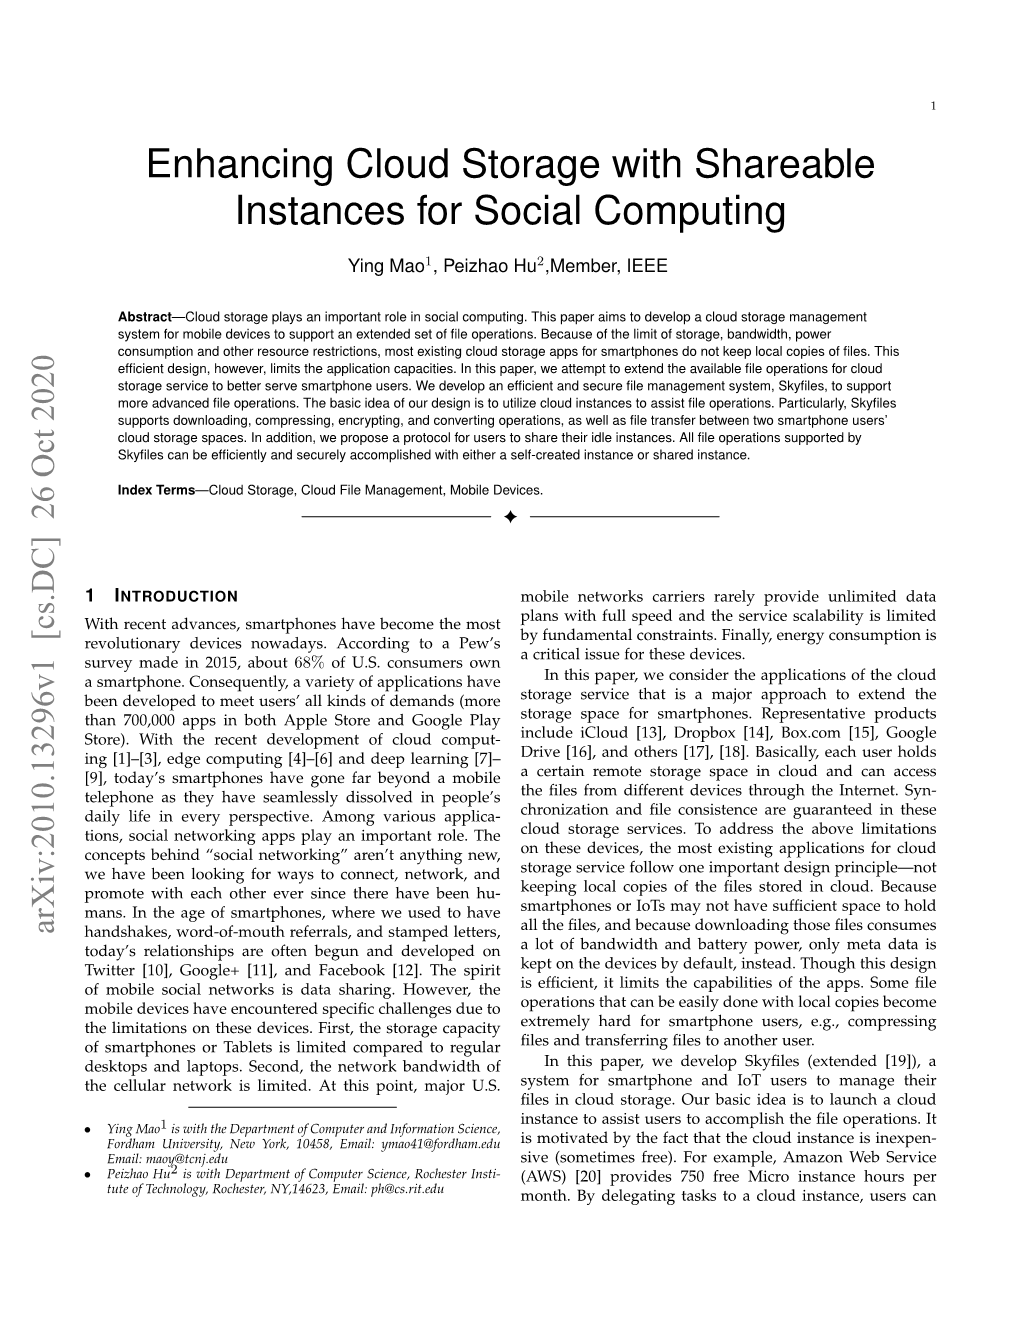 Enhancing Cloud Storage with Shareable Instances for Social Computing